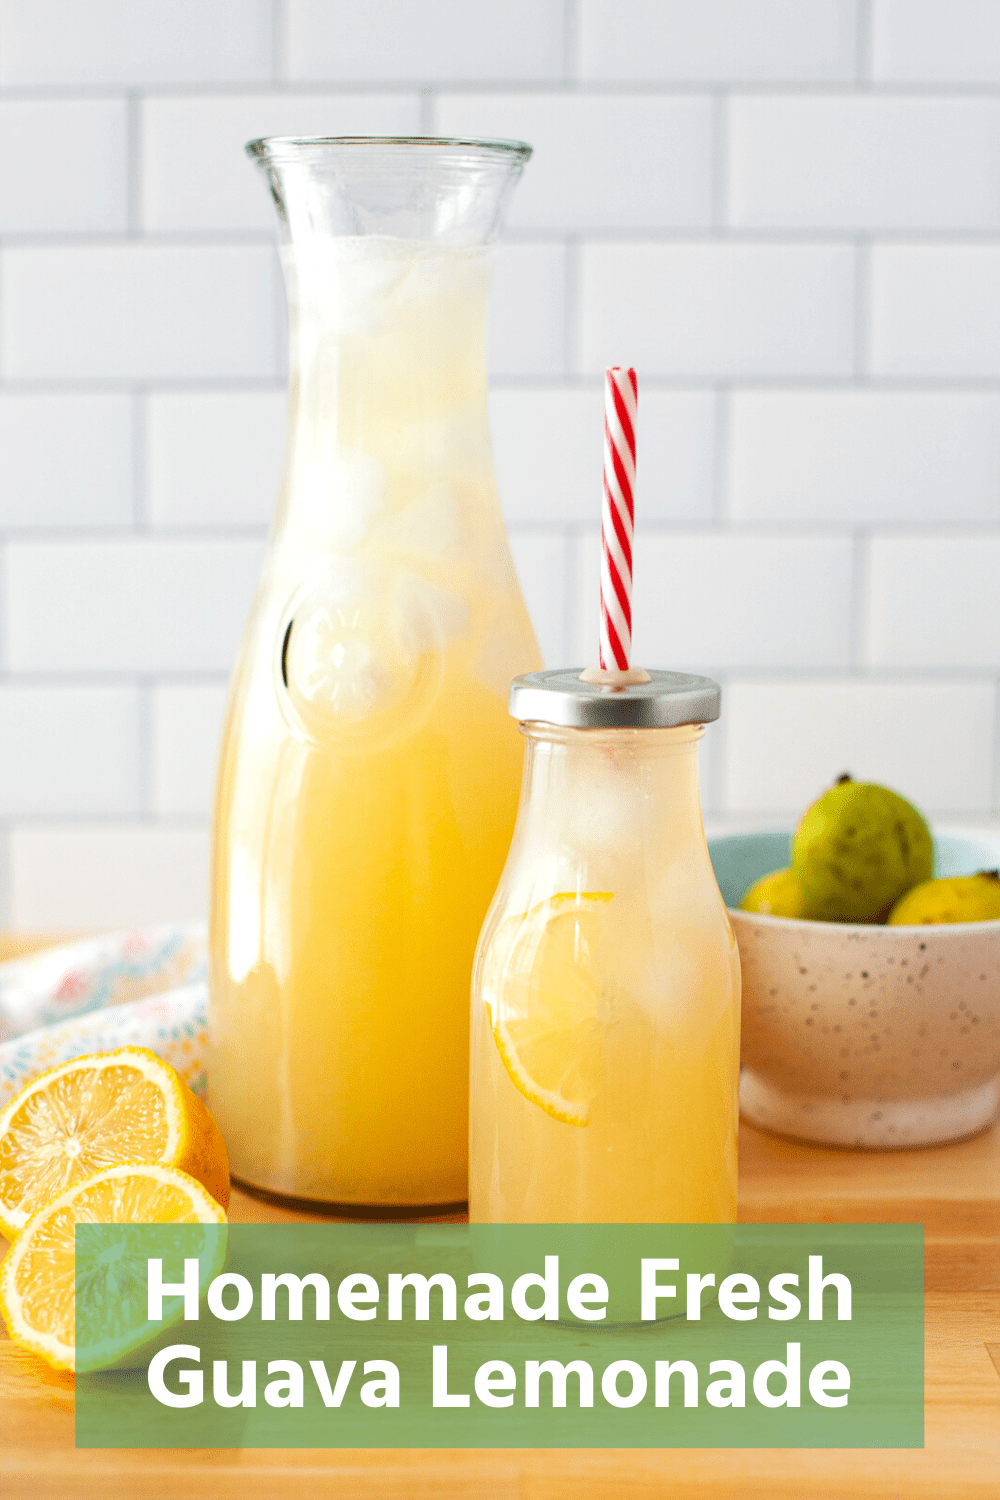 glass carafe and bottle filled with homemade lemonade made with fresh lemons.